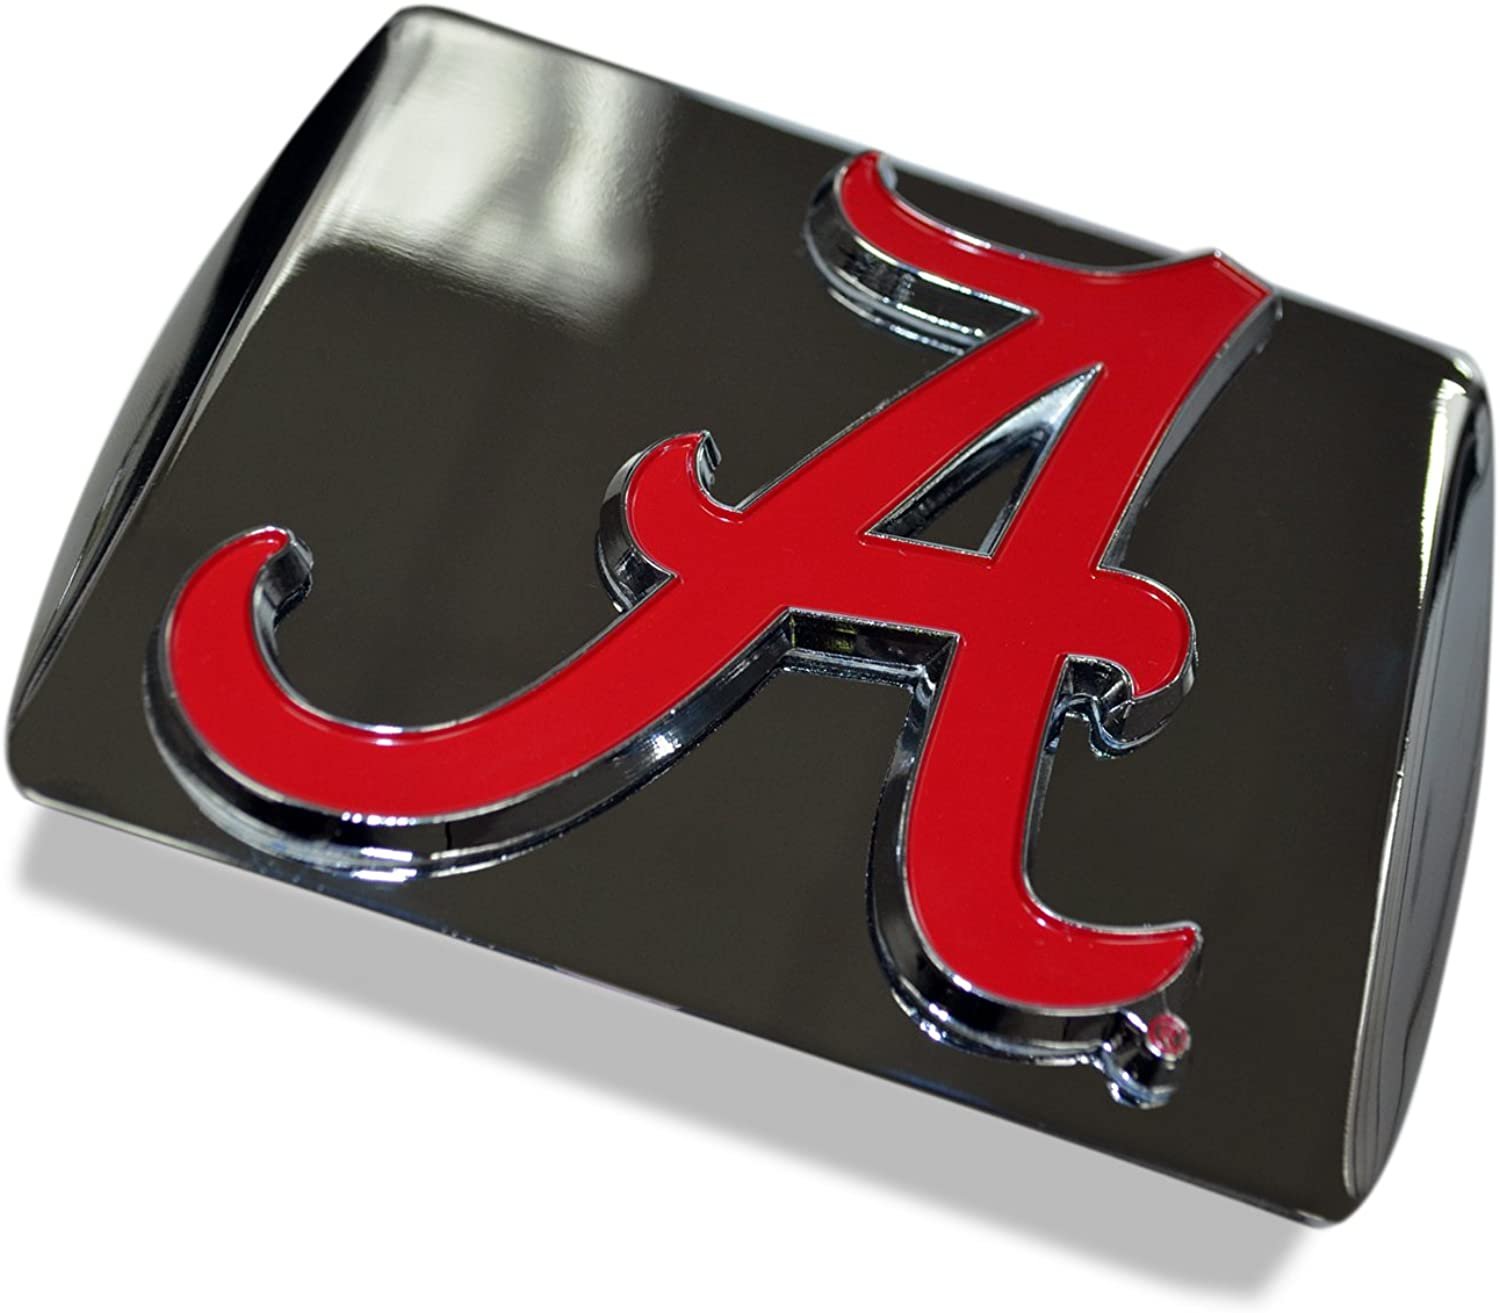 Colorado Avalanche Solid Metal Hitch Cover with Metal Emblem for 2 Inch Receiver